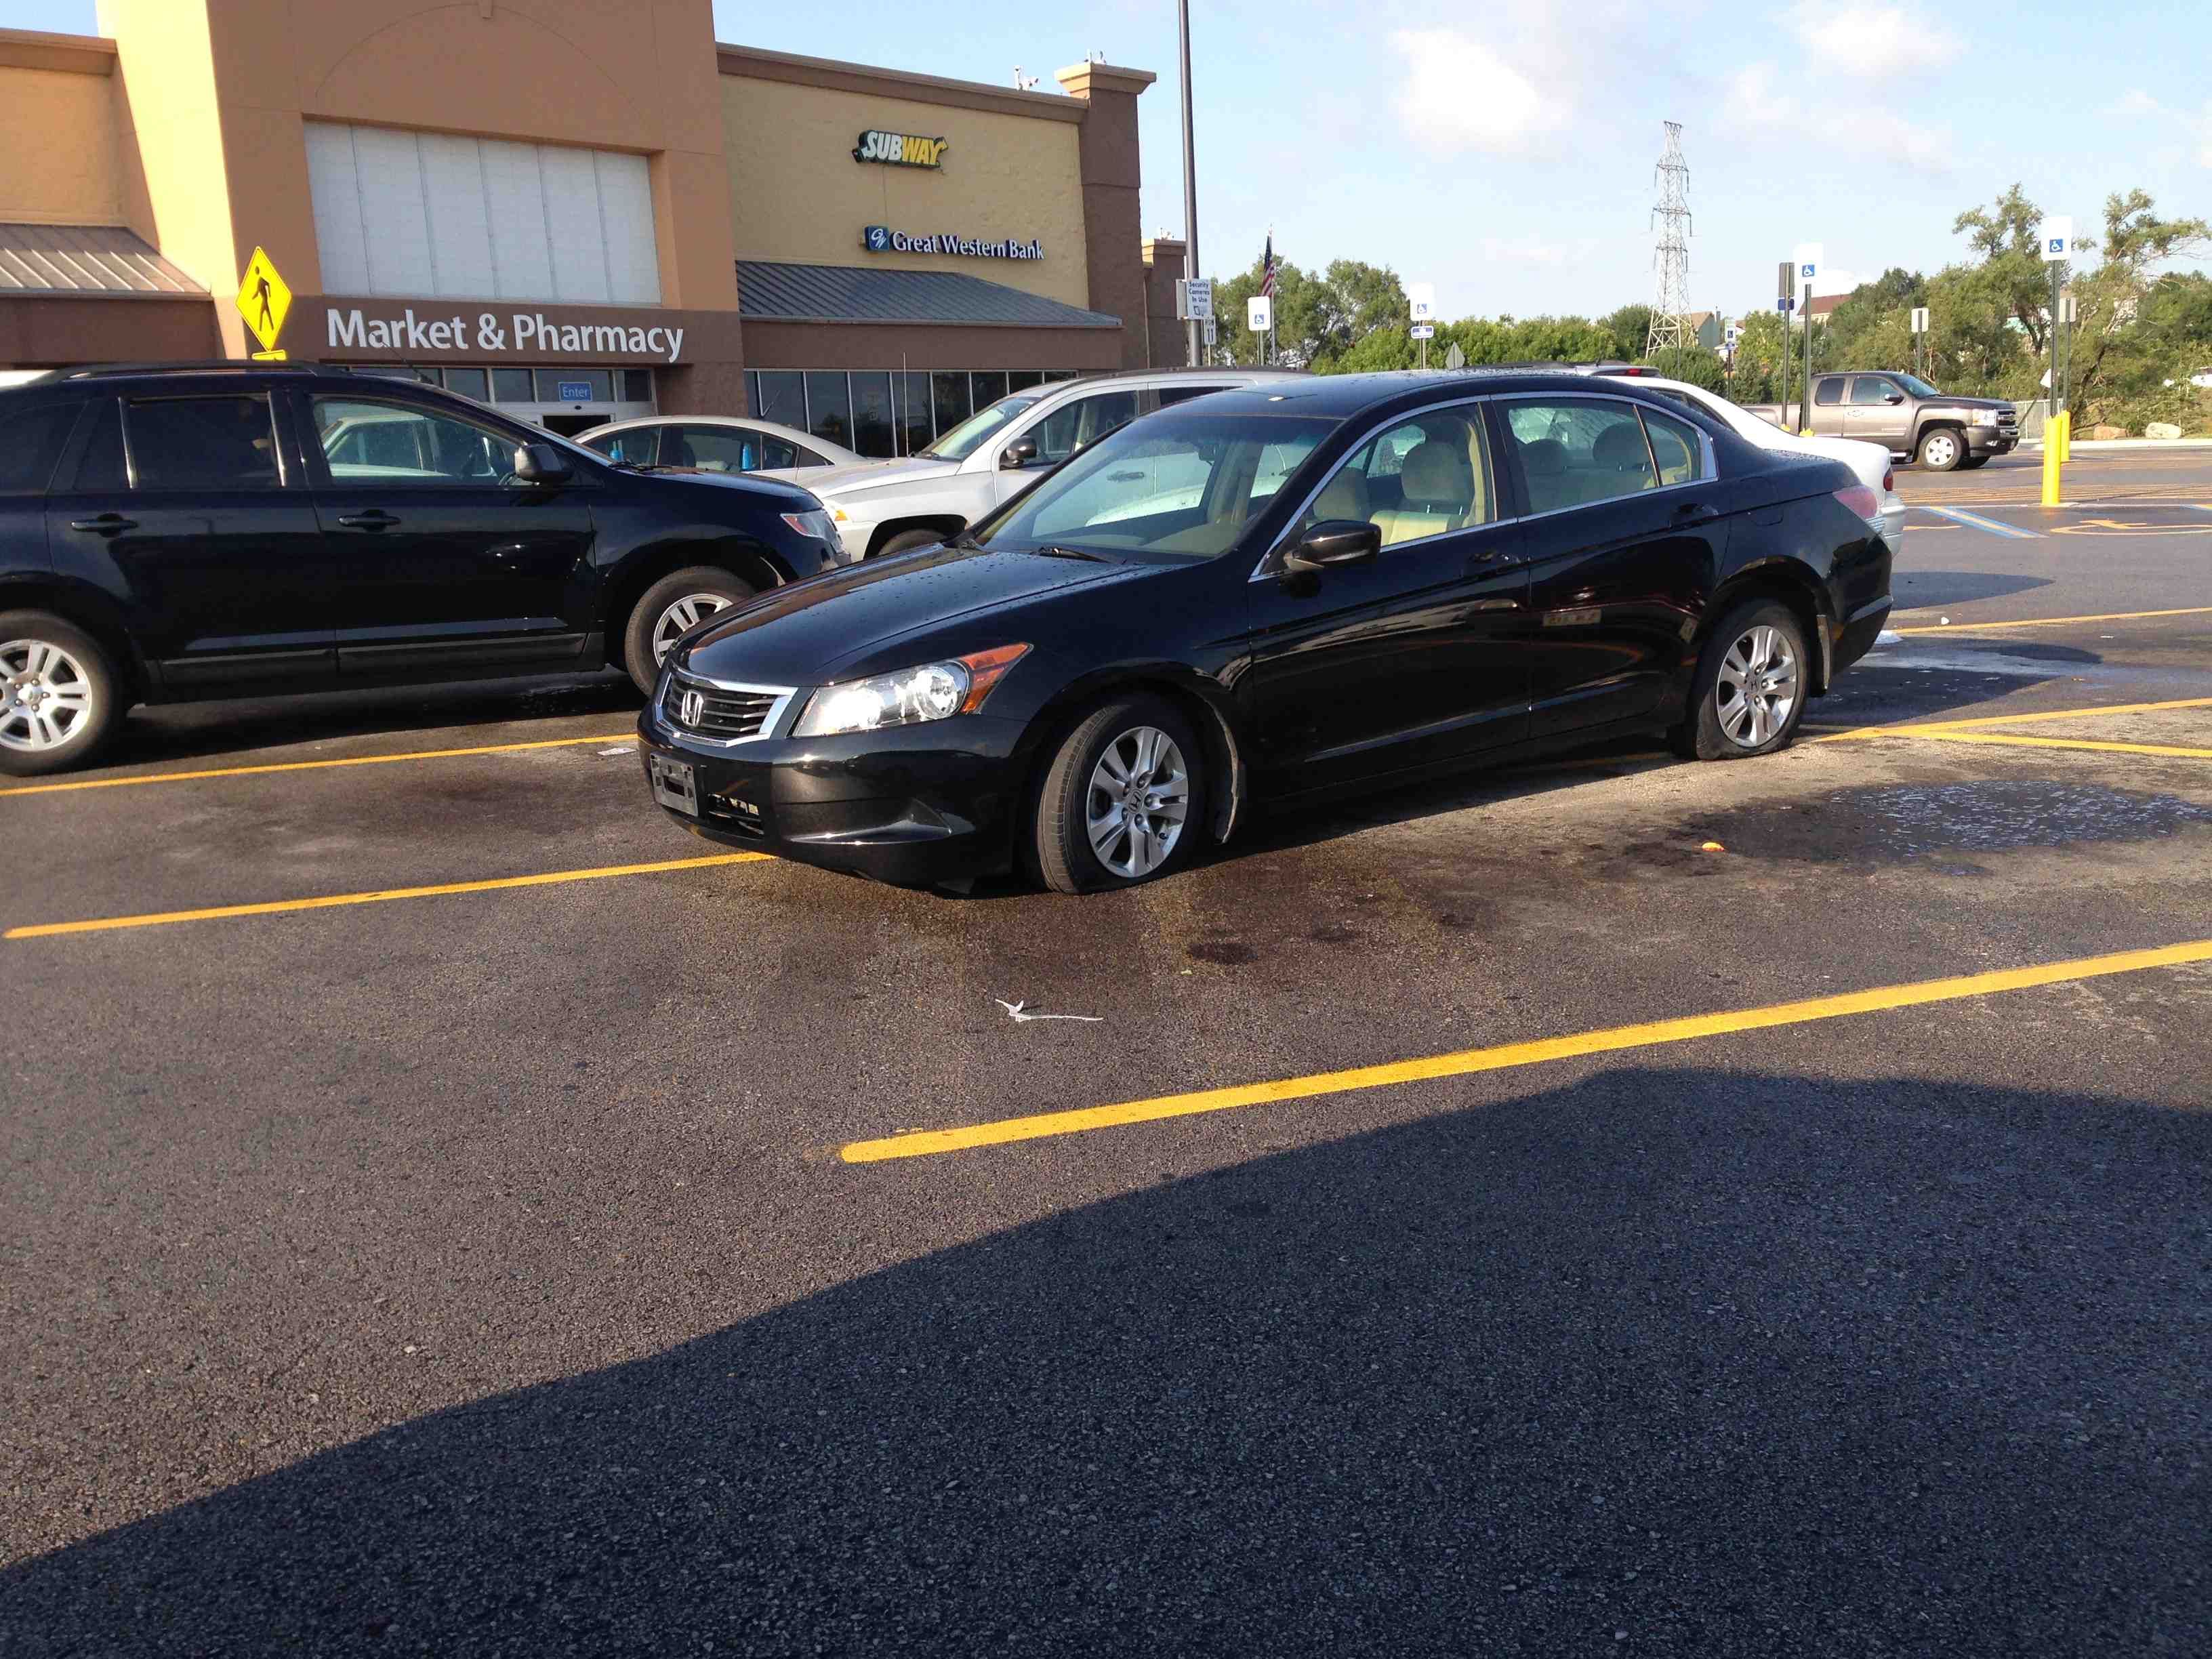 So apparently this happens when someone triple-parks in front of Walmart...